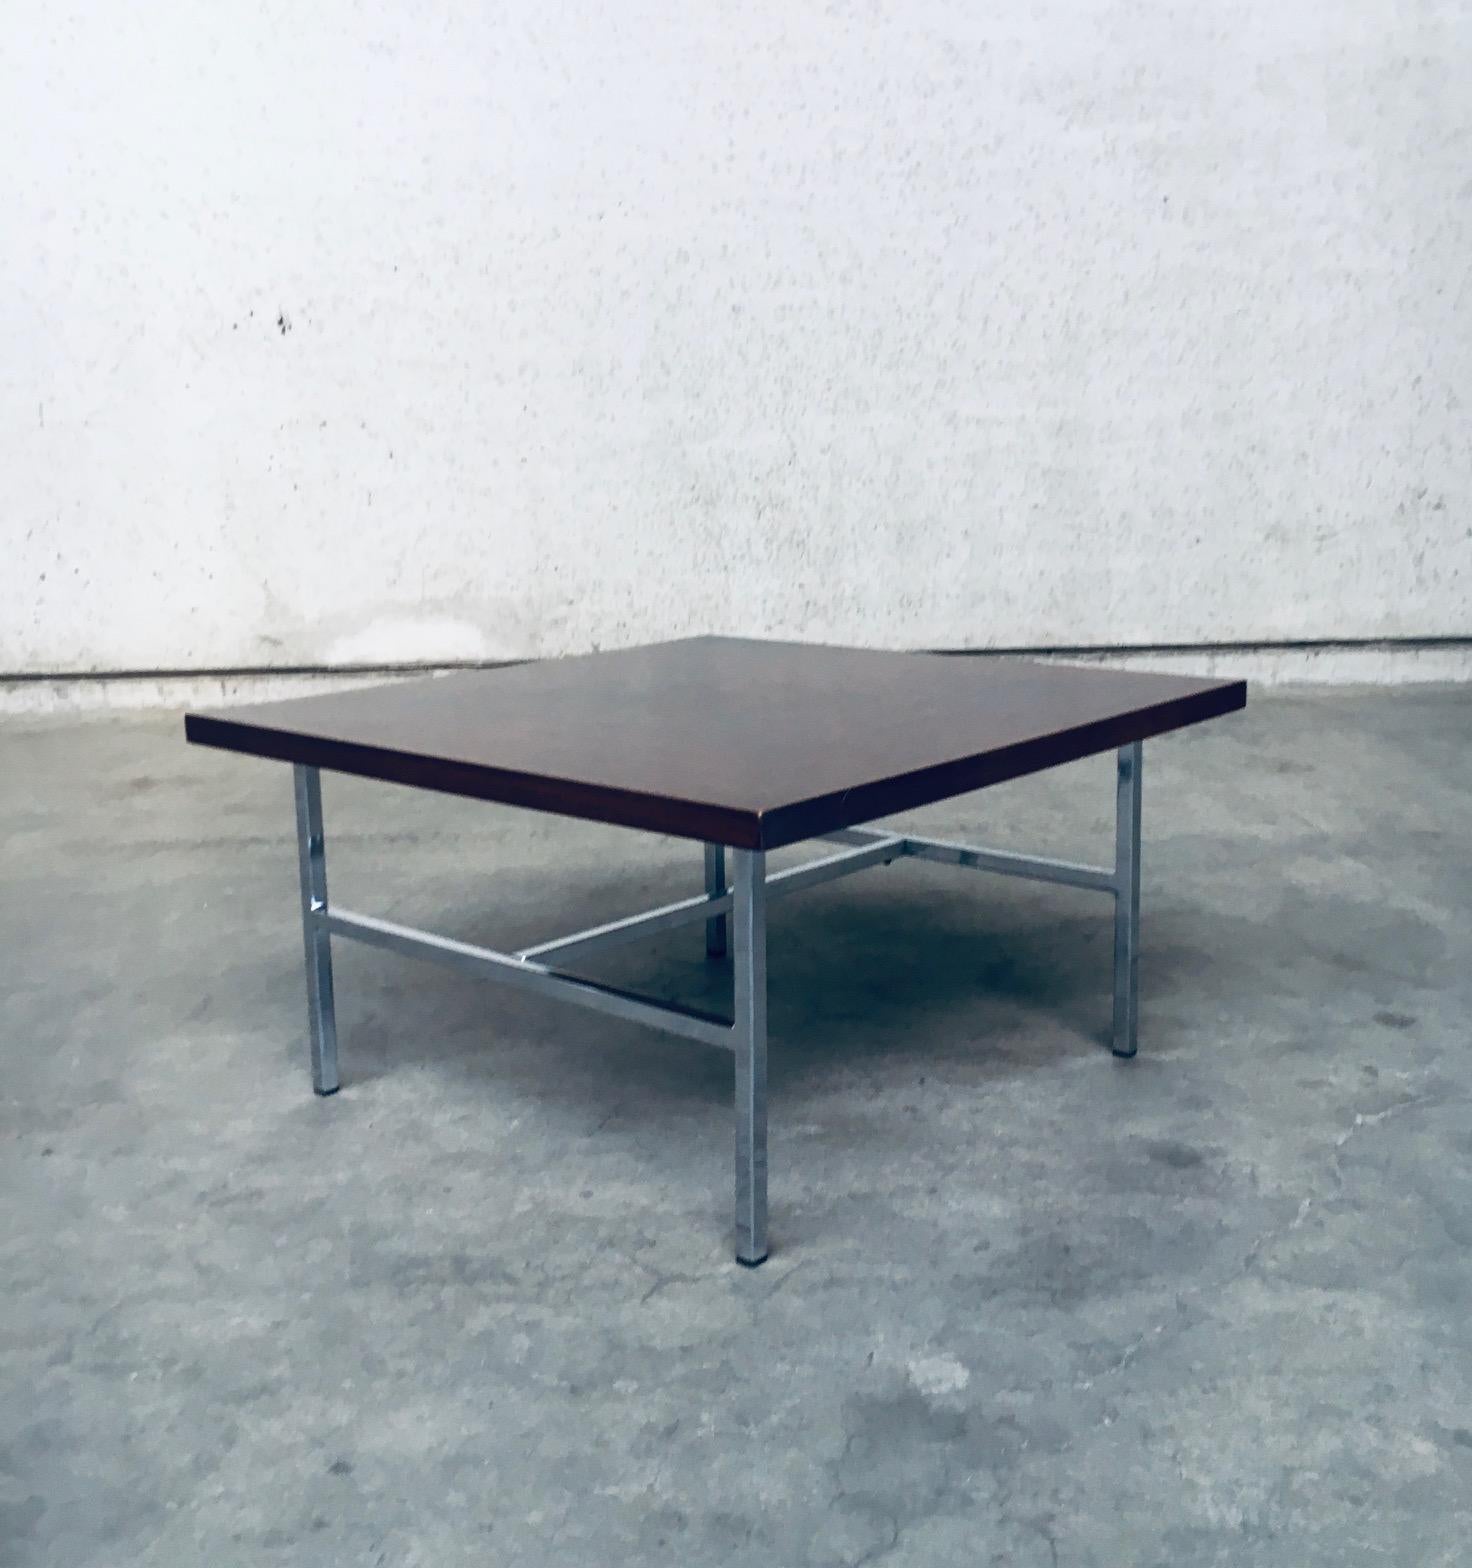 Midcentury Dutch Design Coffee Table, Netherlands 1960's For Sale 2